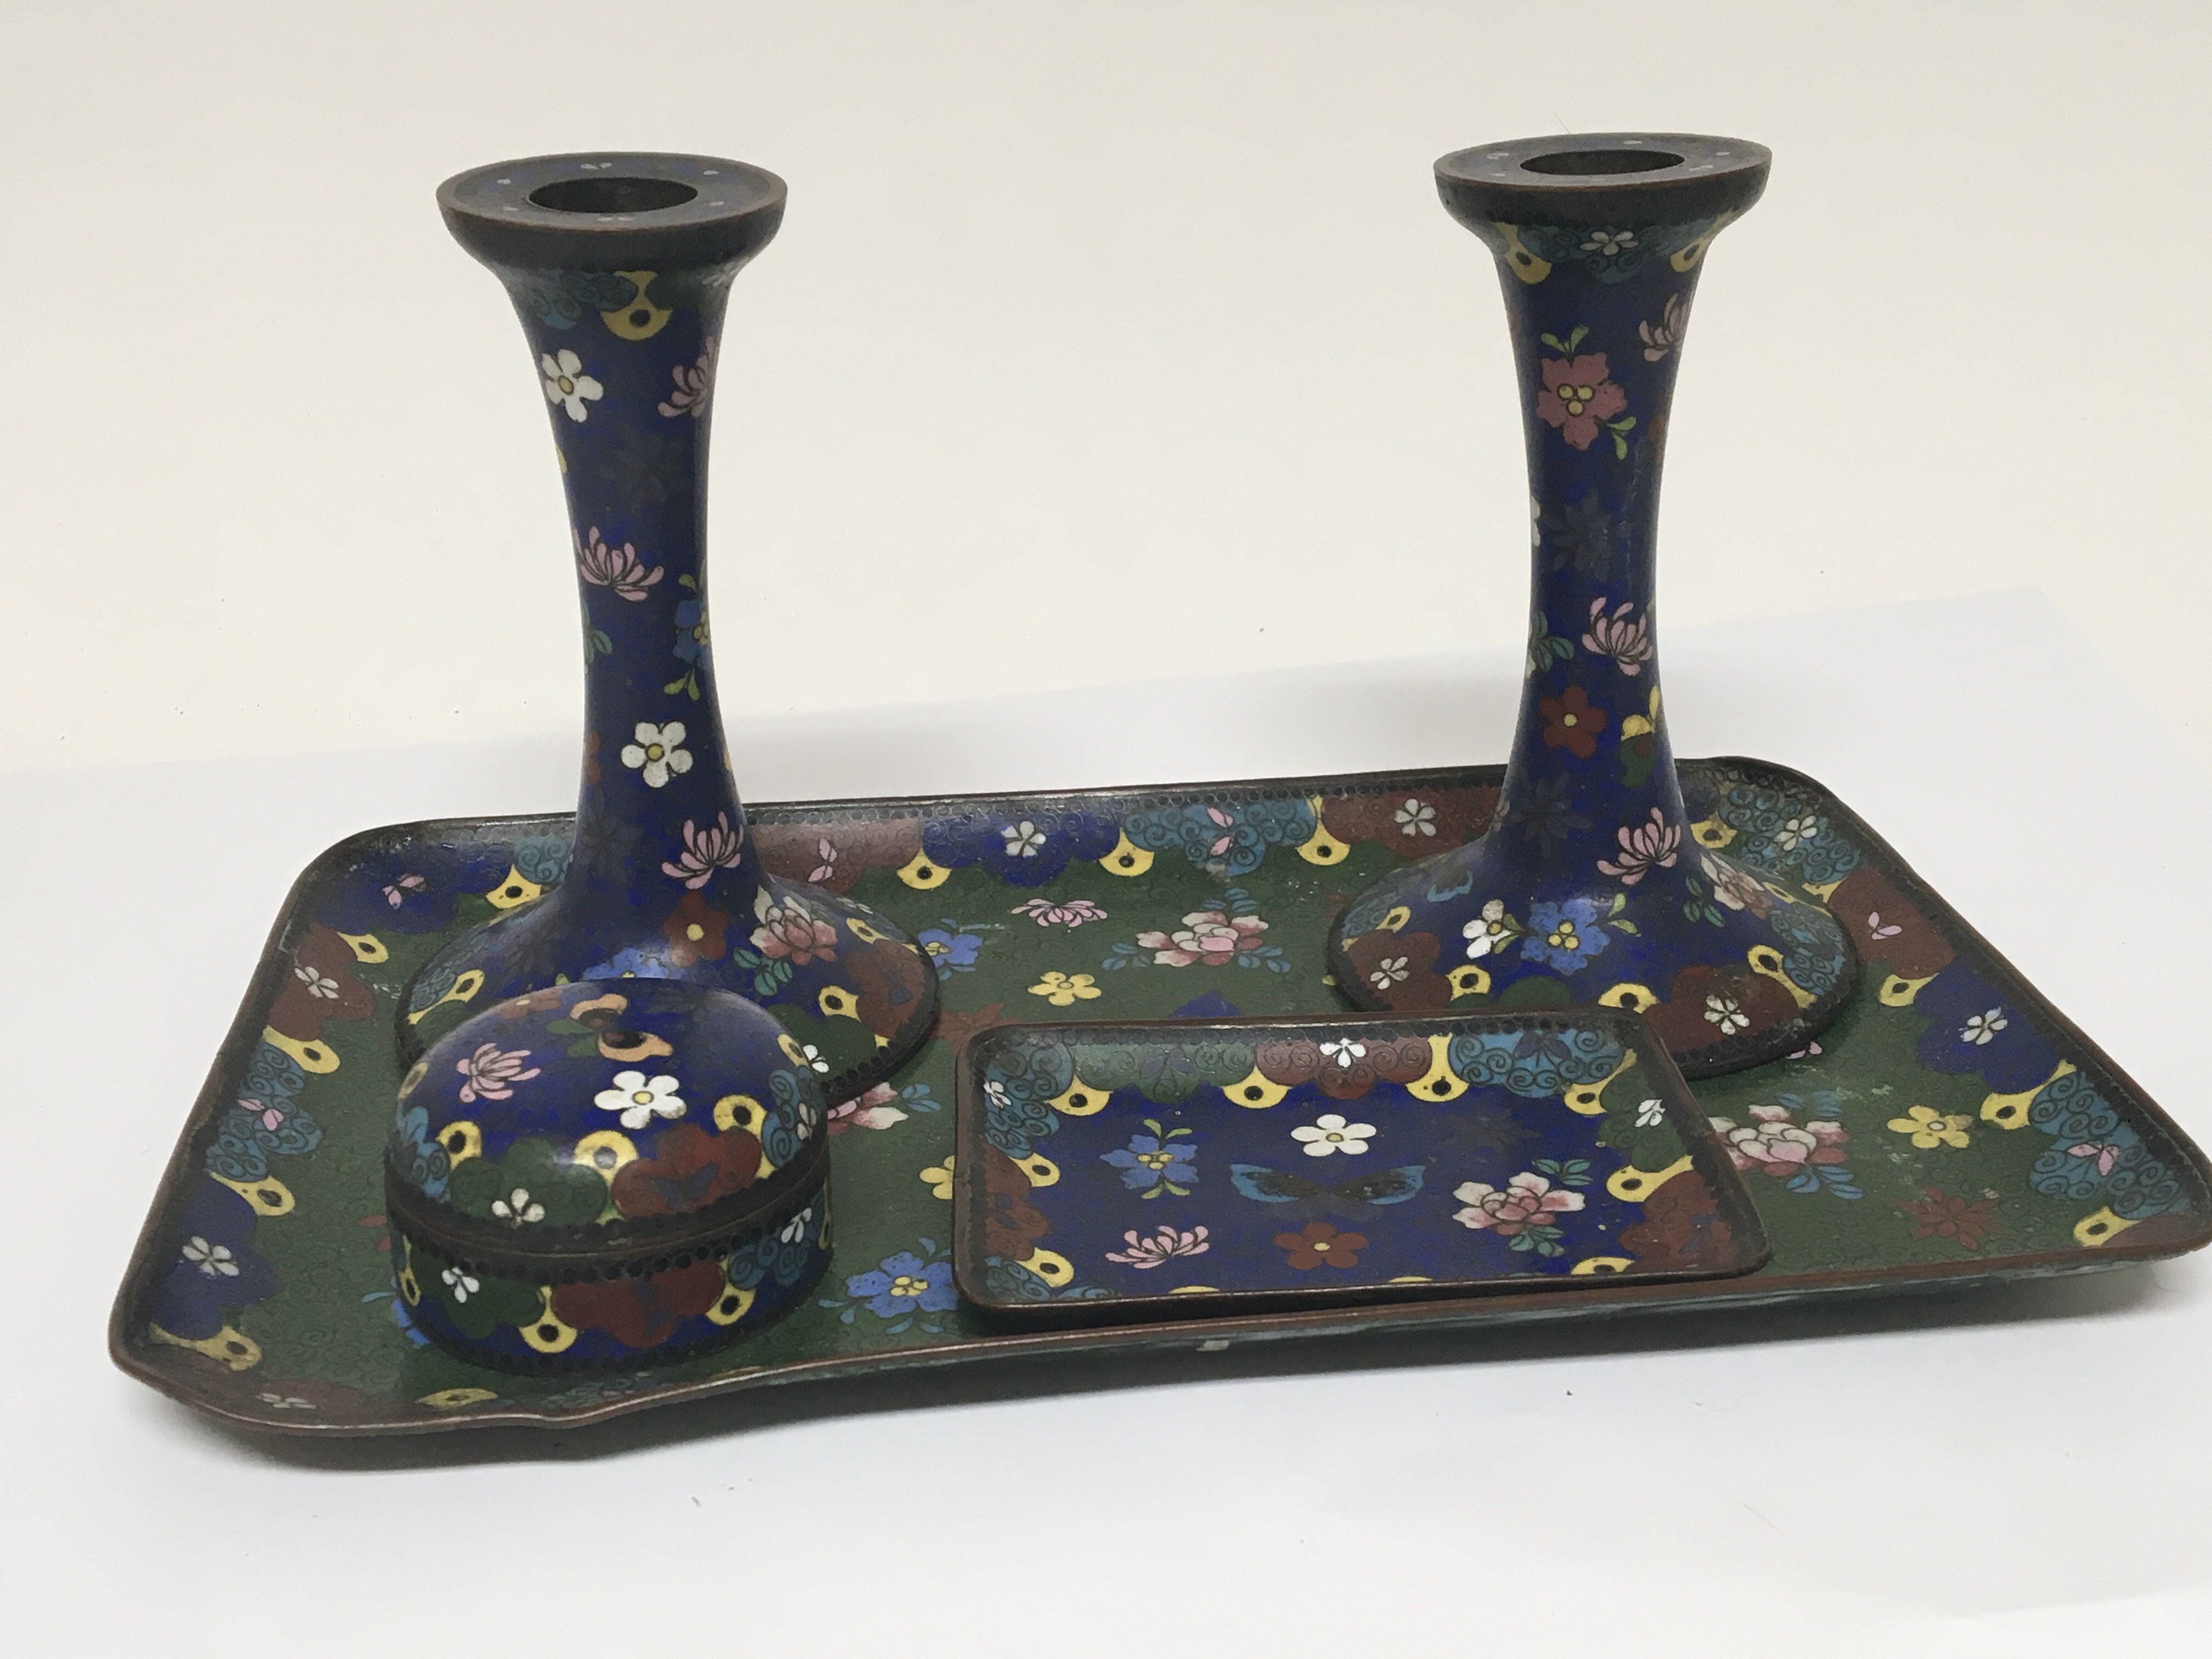 A cloisonné dressing table tray with candle sticks